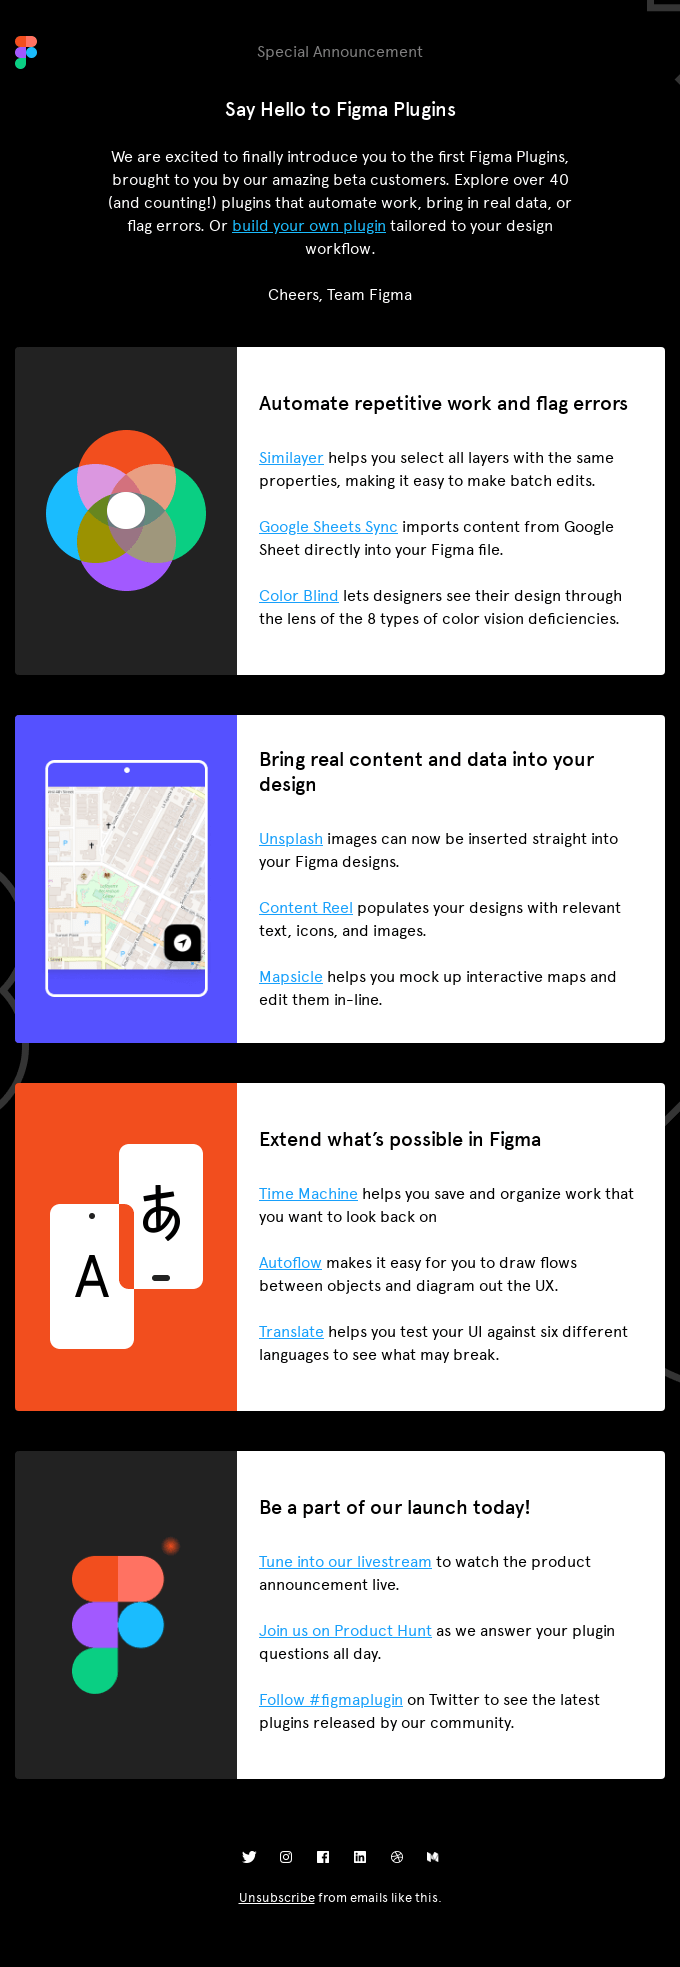 Say hello to Figma Plugins - Figma Email Newsletter